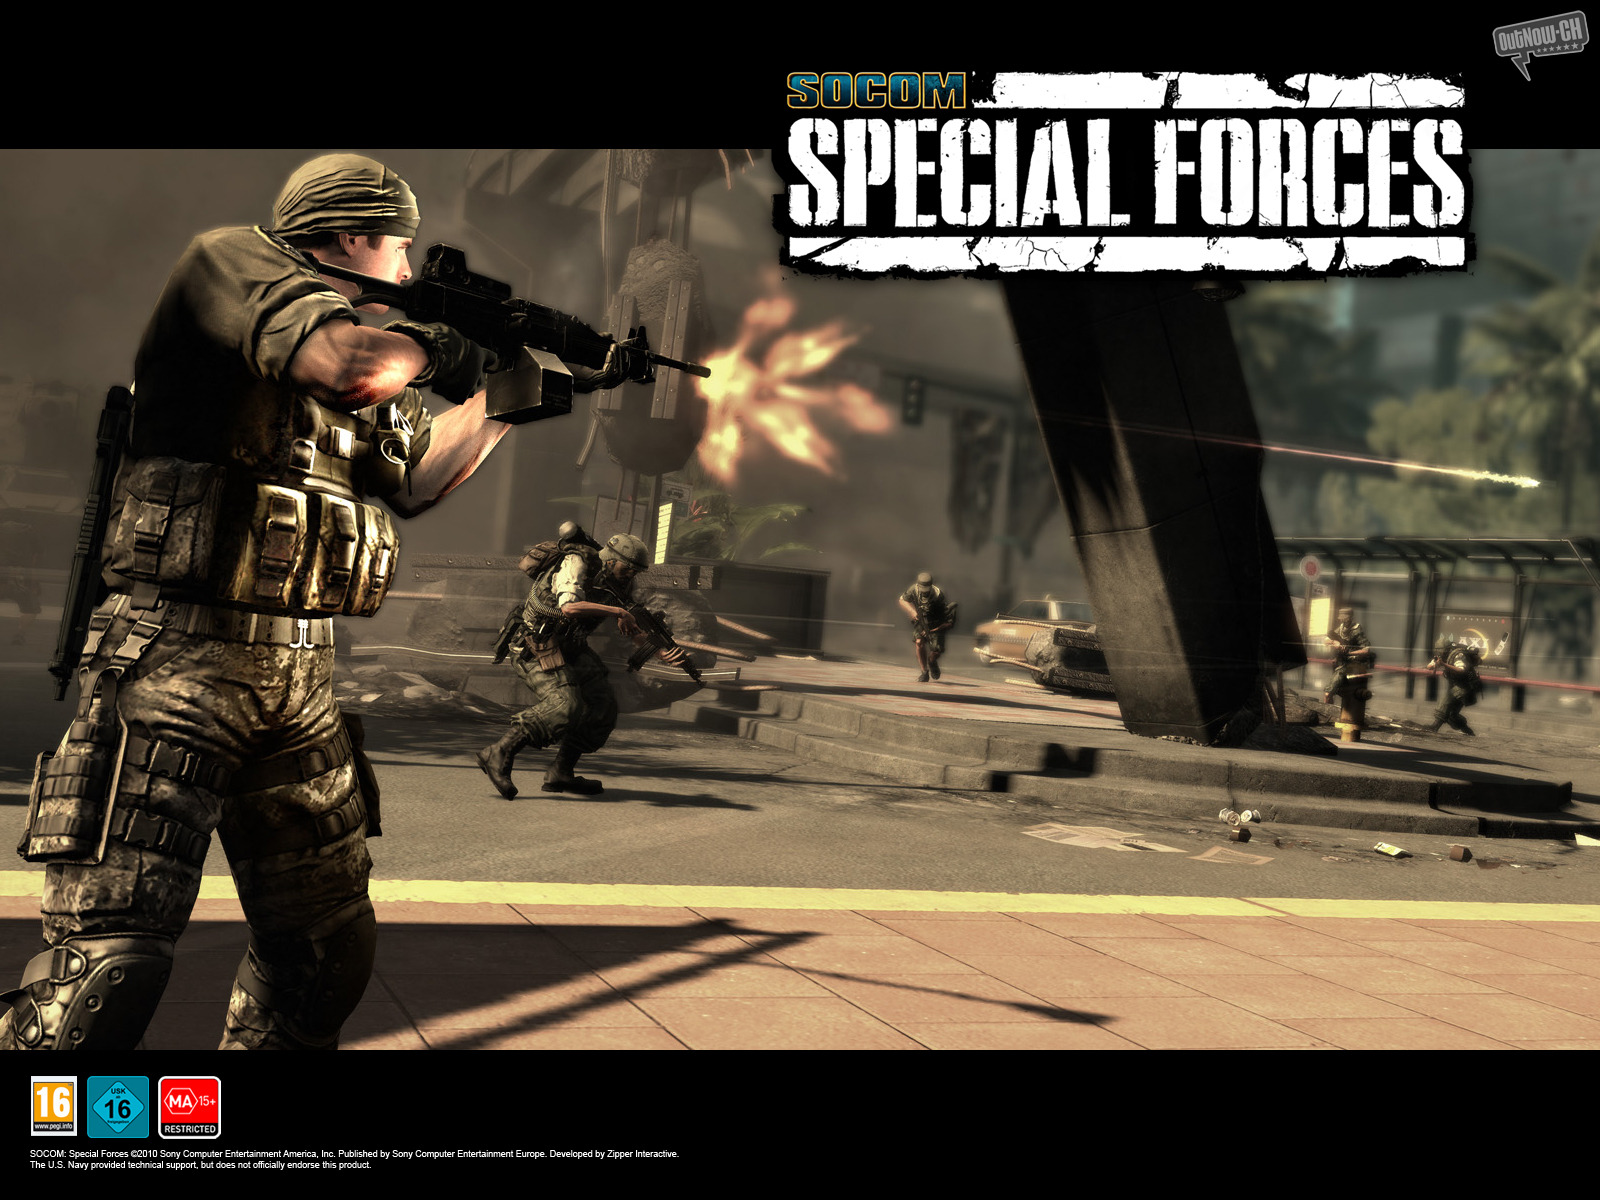 Game Gun Socom Soldier Special Forces 1600x1200